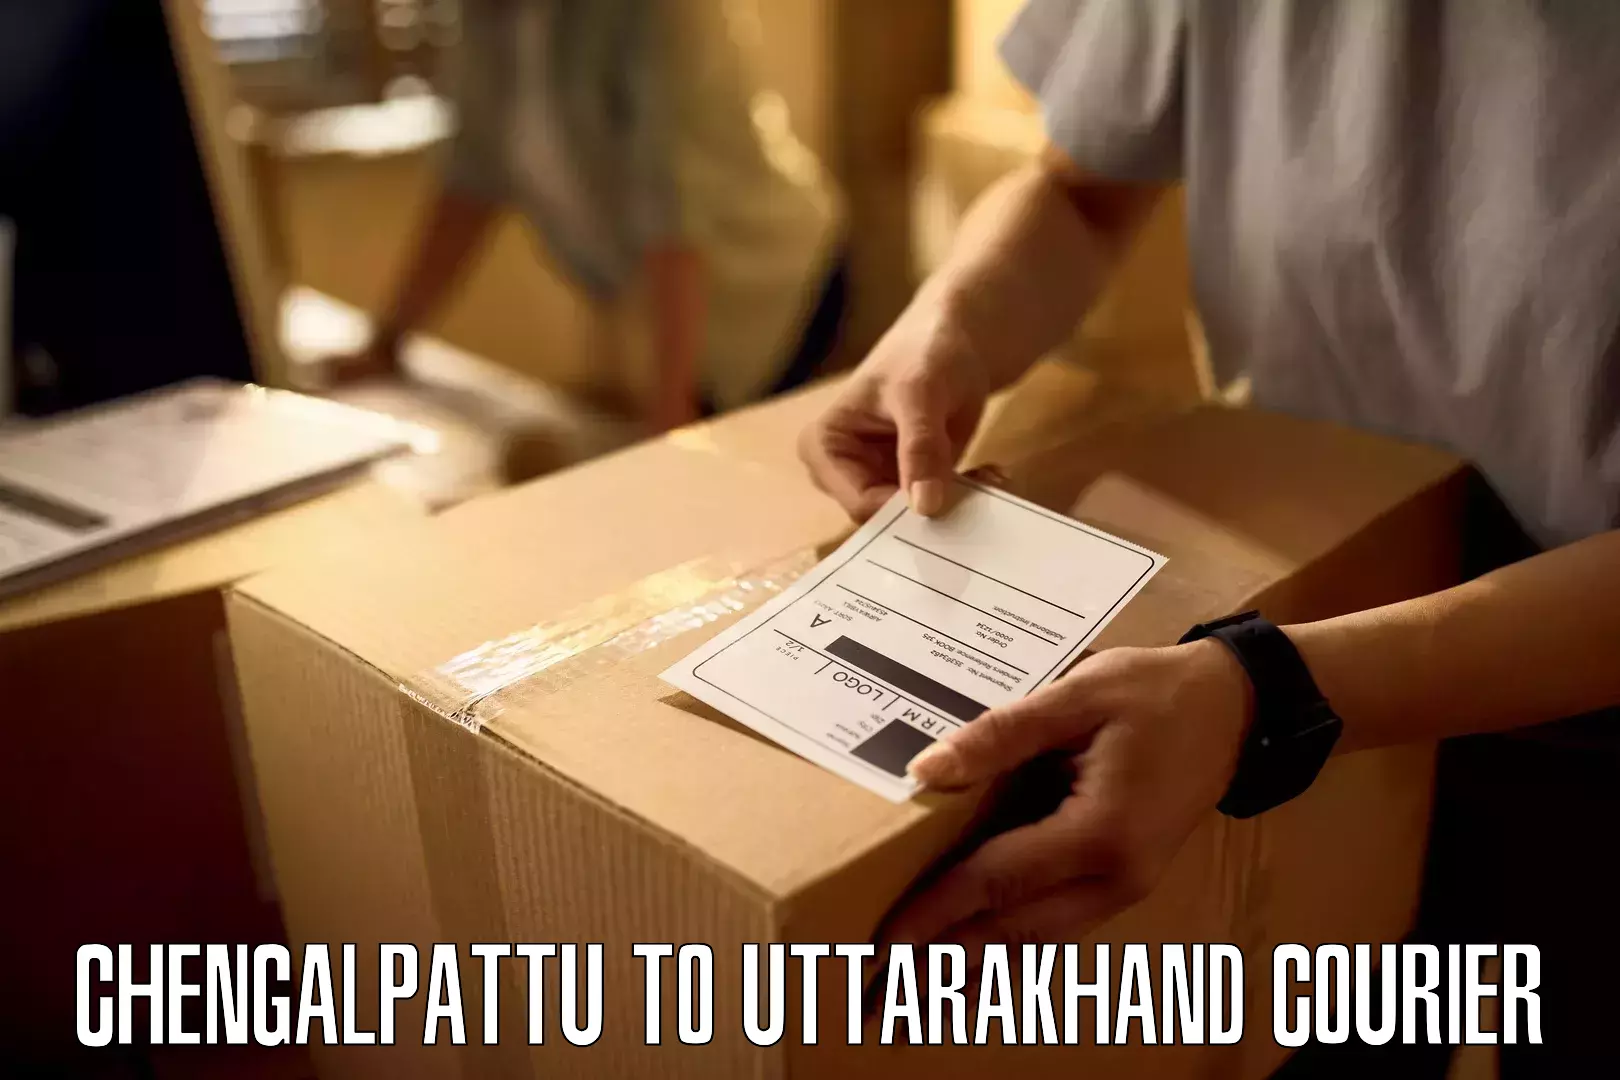 Quality courier services Chengalpattu to Tanakpur